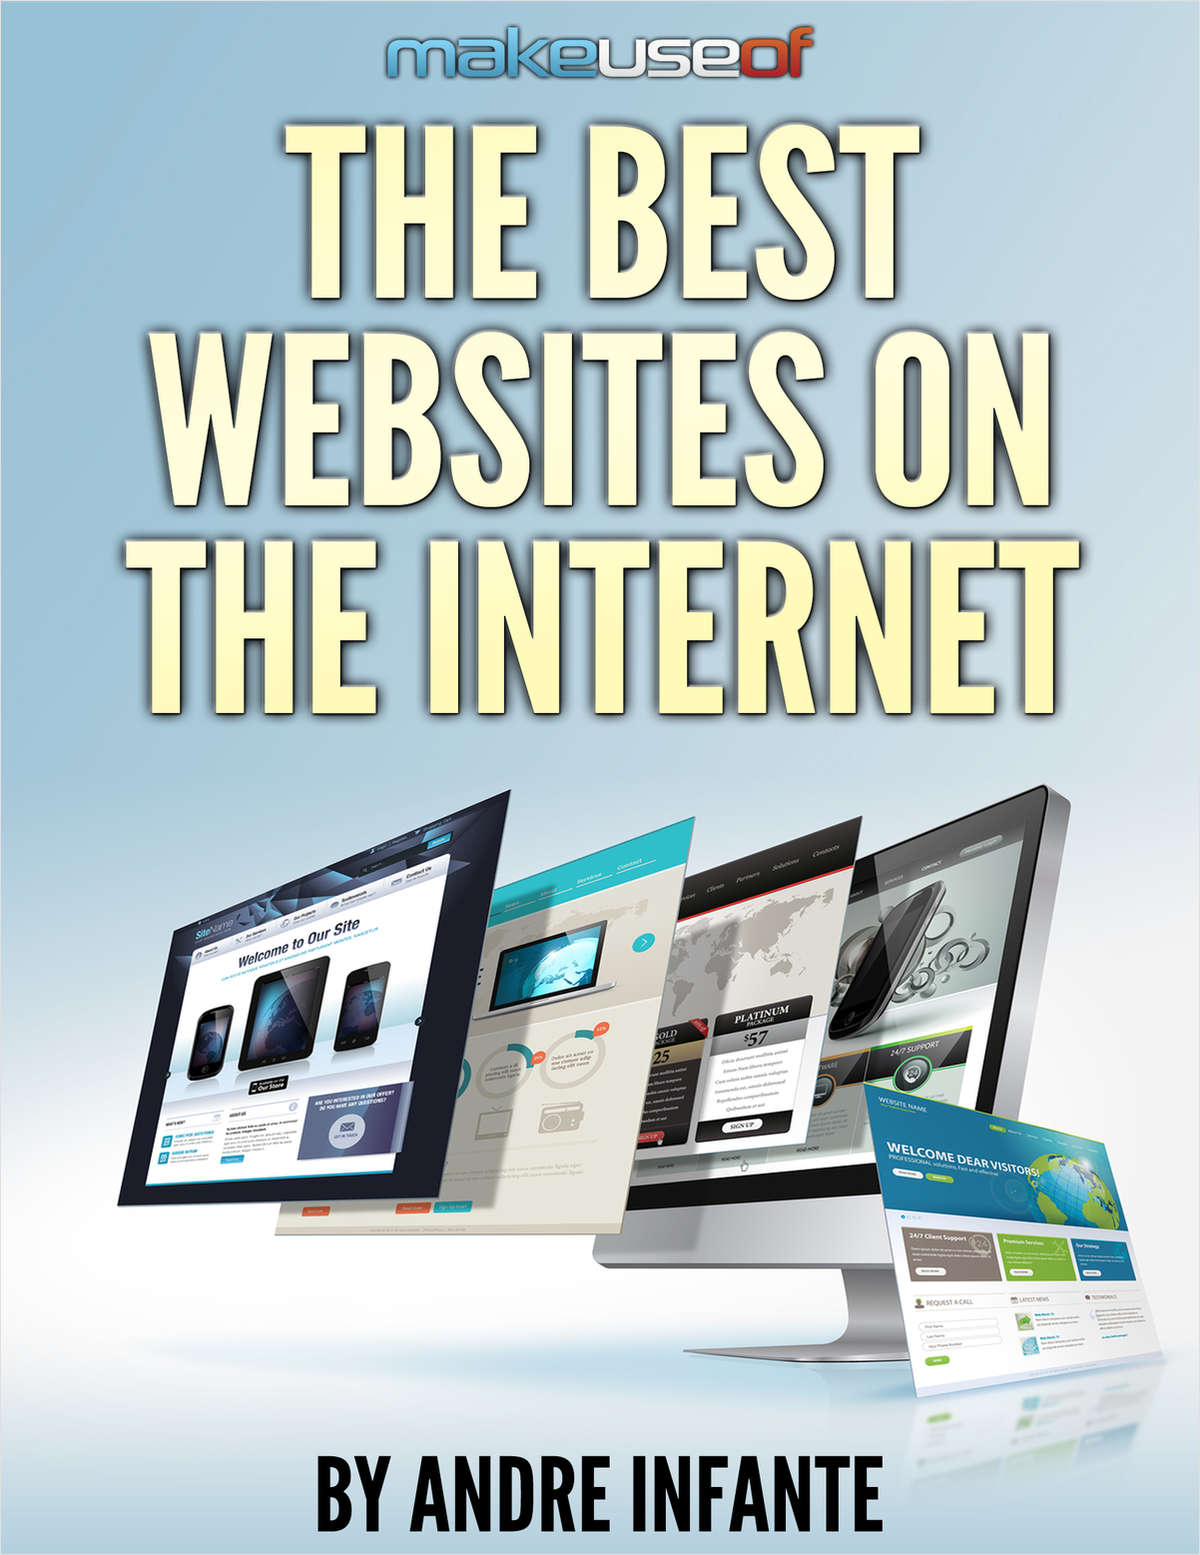 The Best Websites on the Internet